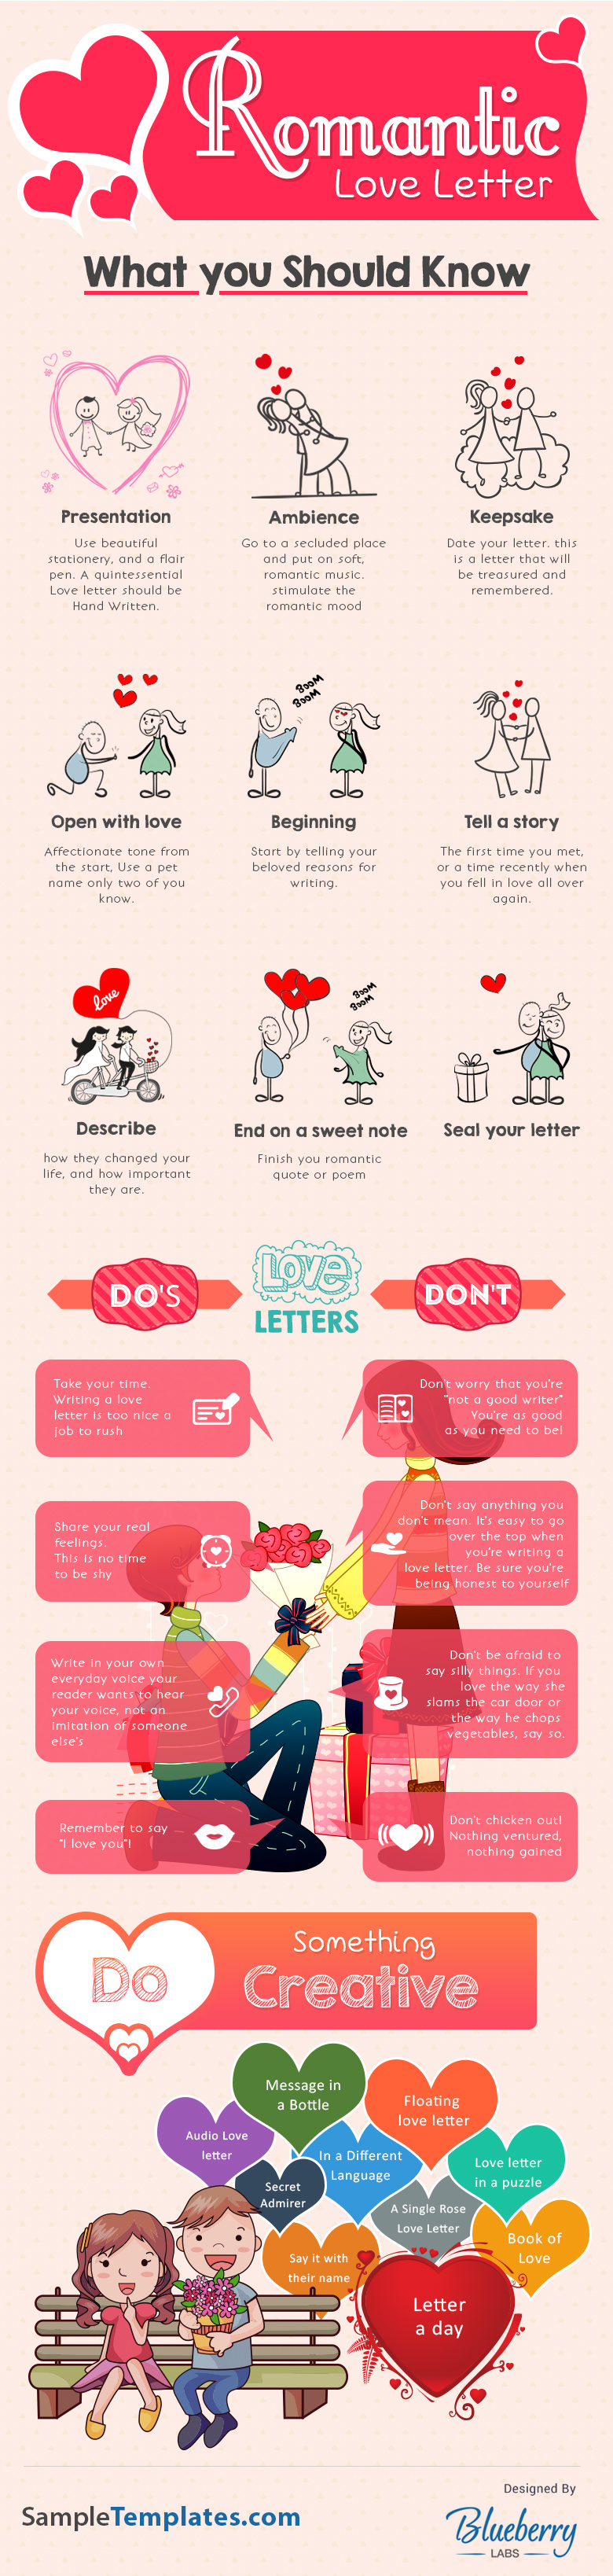 Romantic Love Letter – What you should know